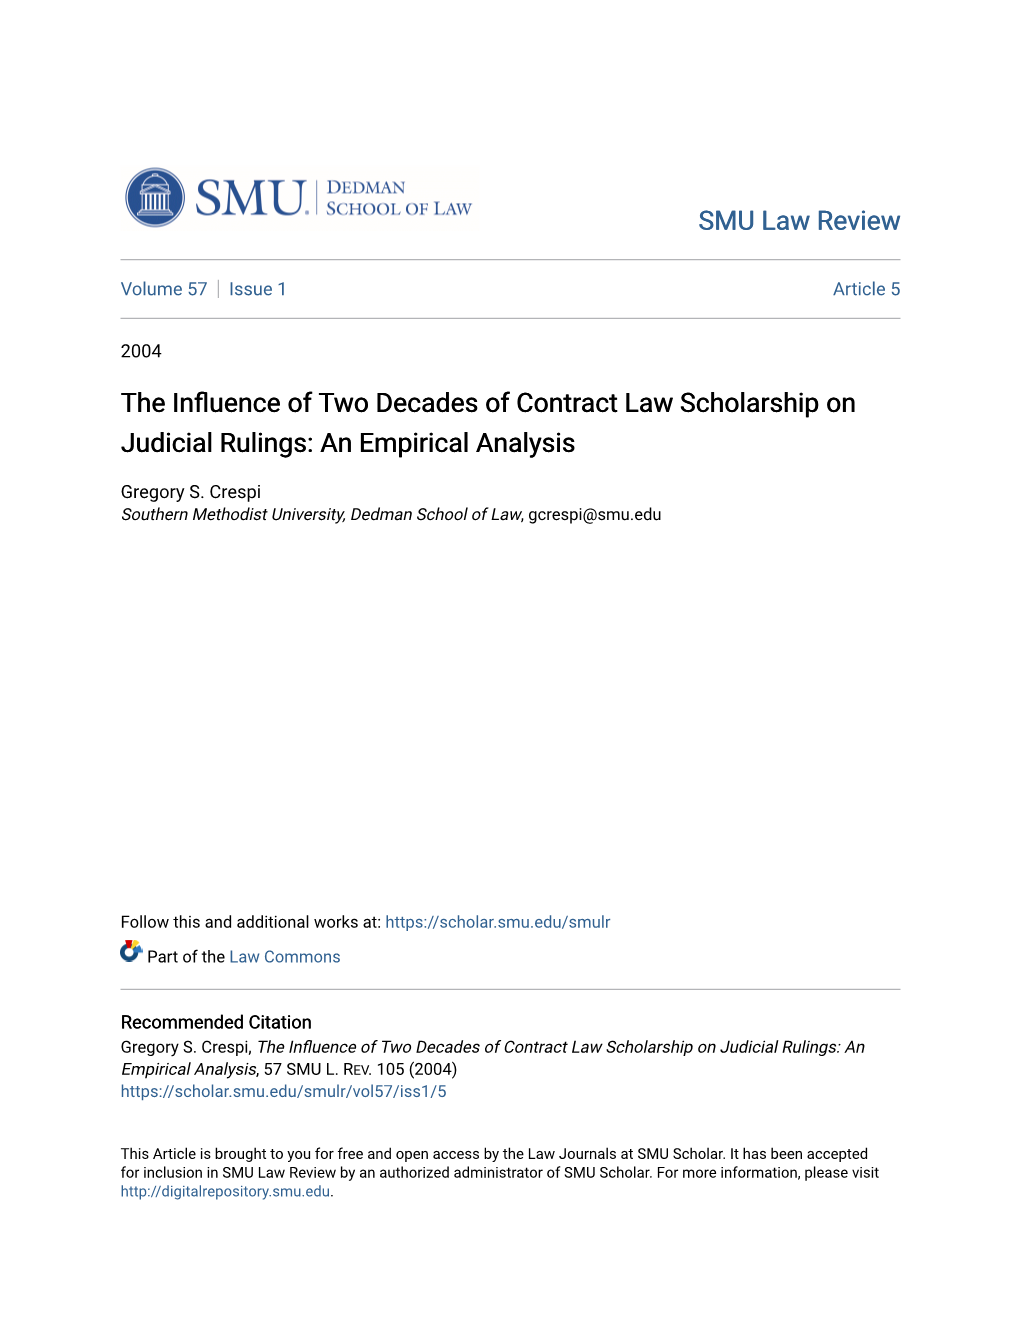 THE INFLUENCE of Two DECADES of CONTRACT LAW SCHOLARSHIP on JUDICIAL RULINGS: an EMPIRICAL ANALYSIS